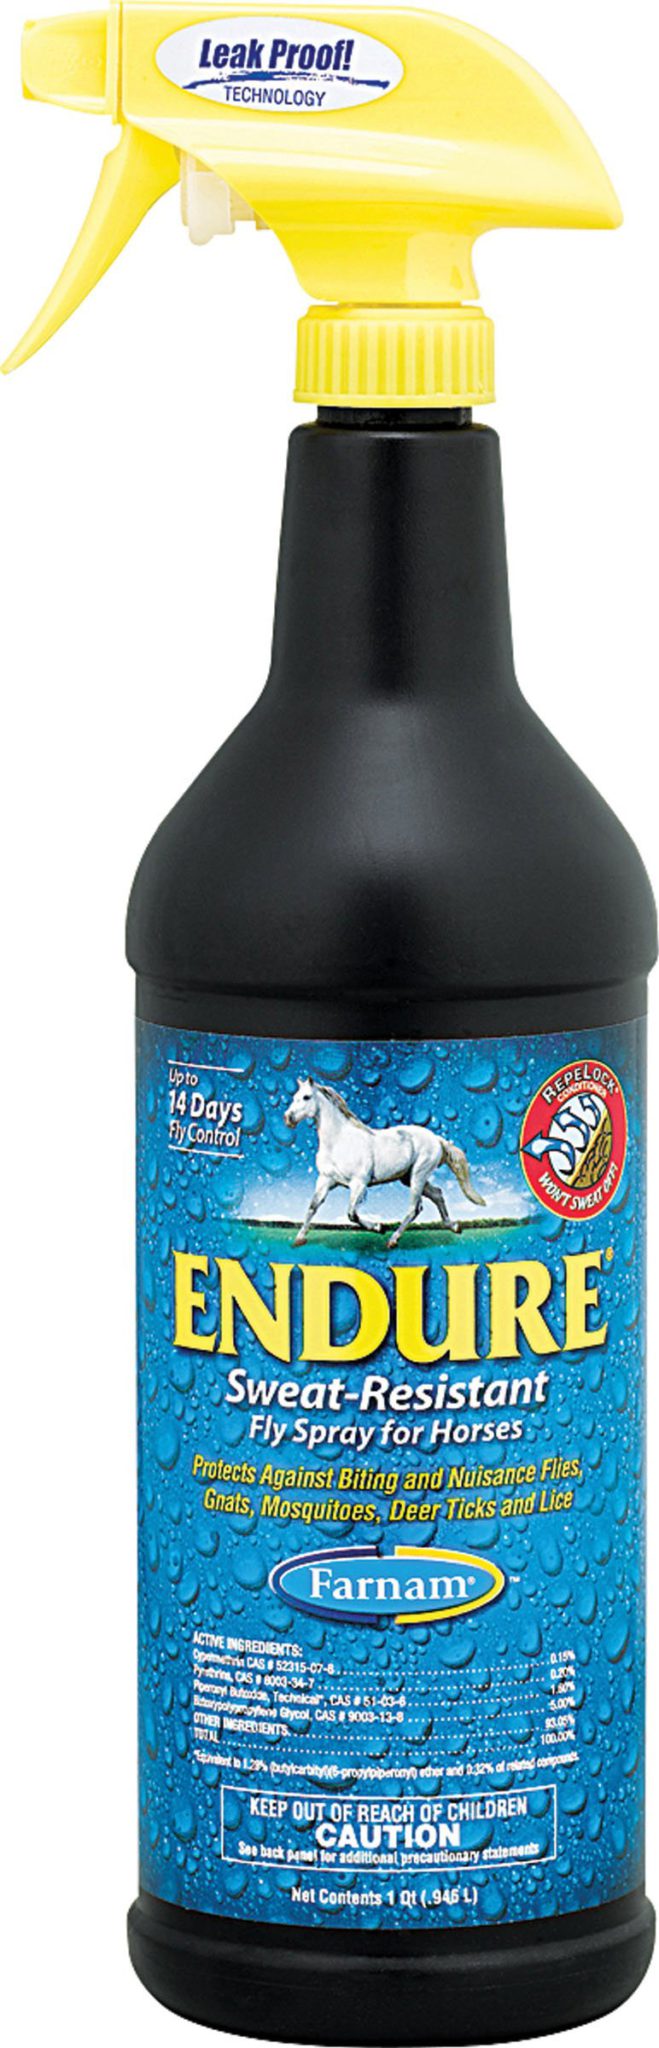 Endure Sweat-Resistant Fly Spray for Horses 1 Qt - $34.95